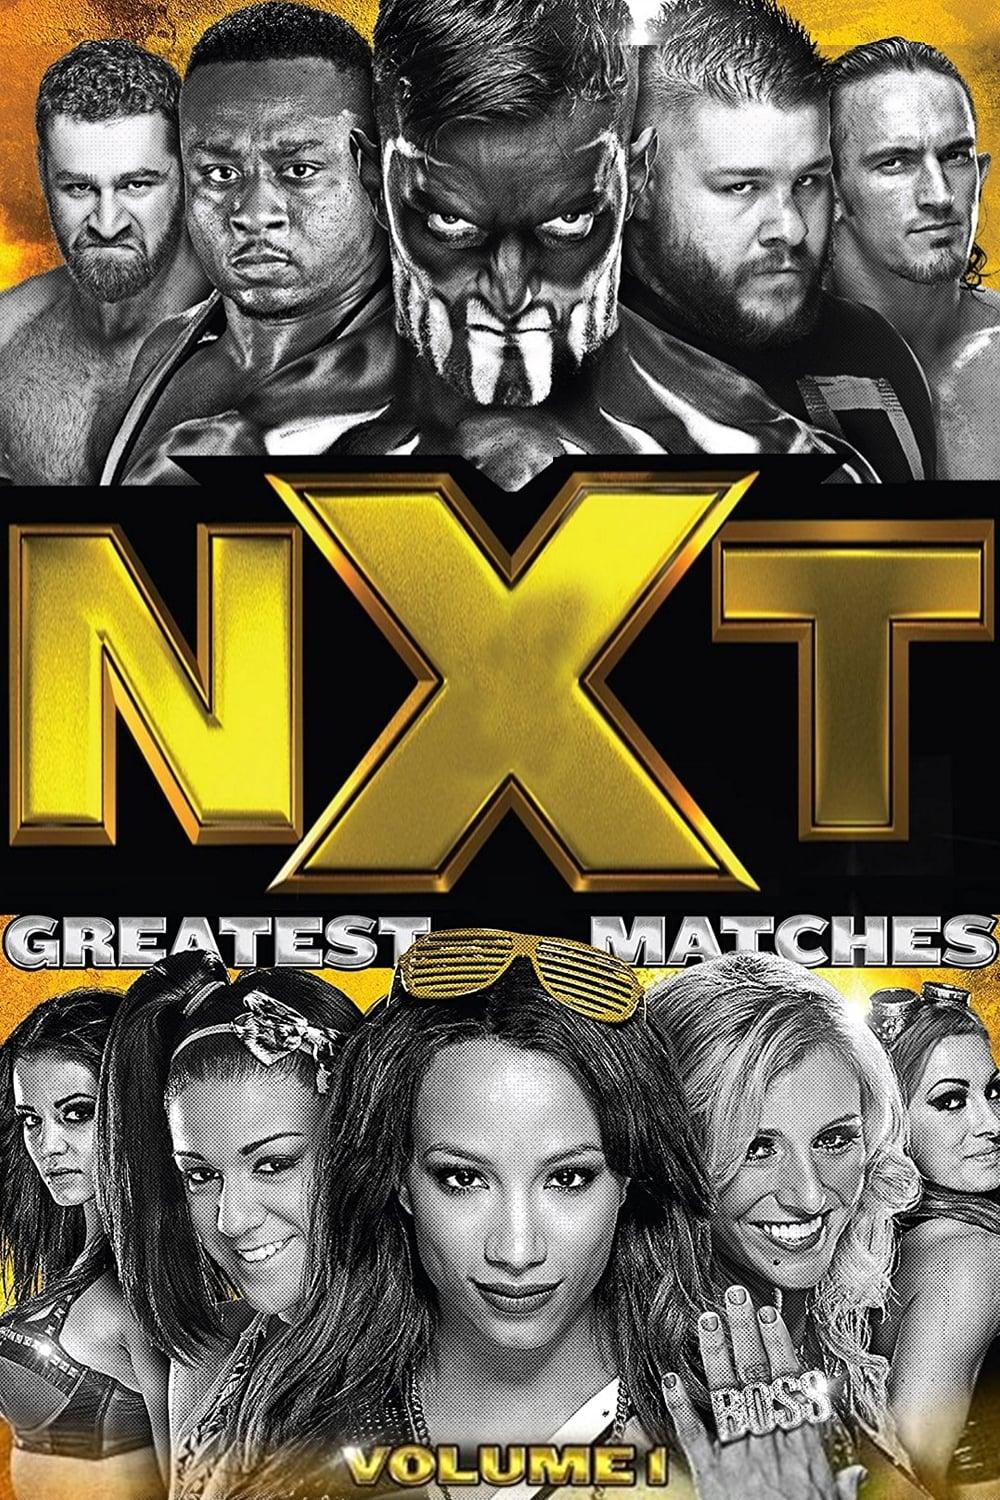 NXT's Greatest Matches Vol. 1 poster